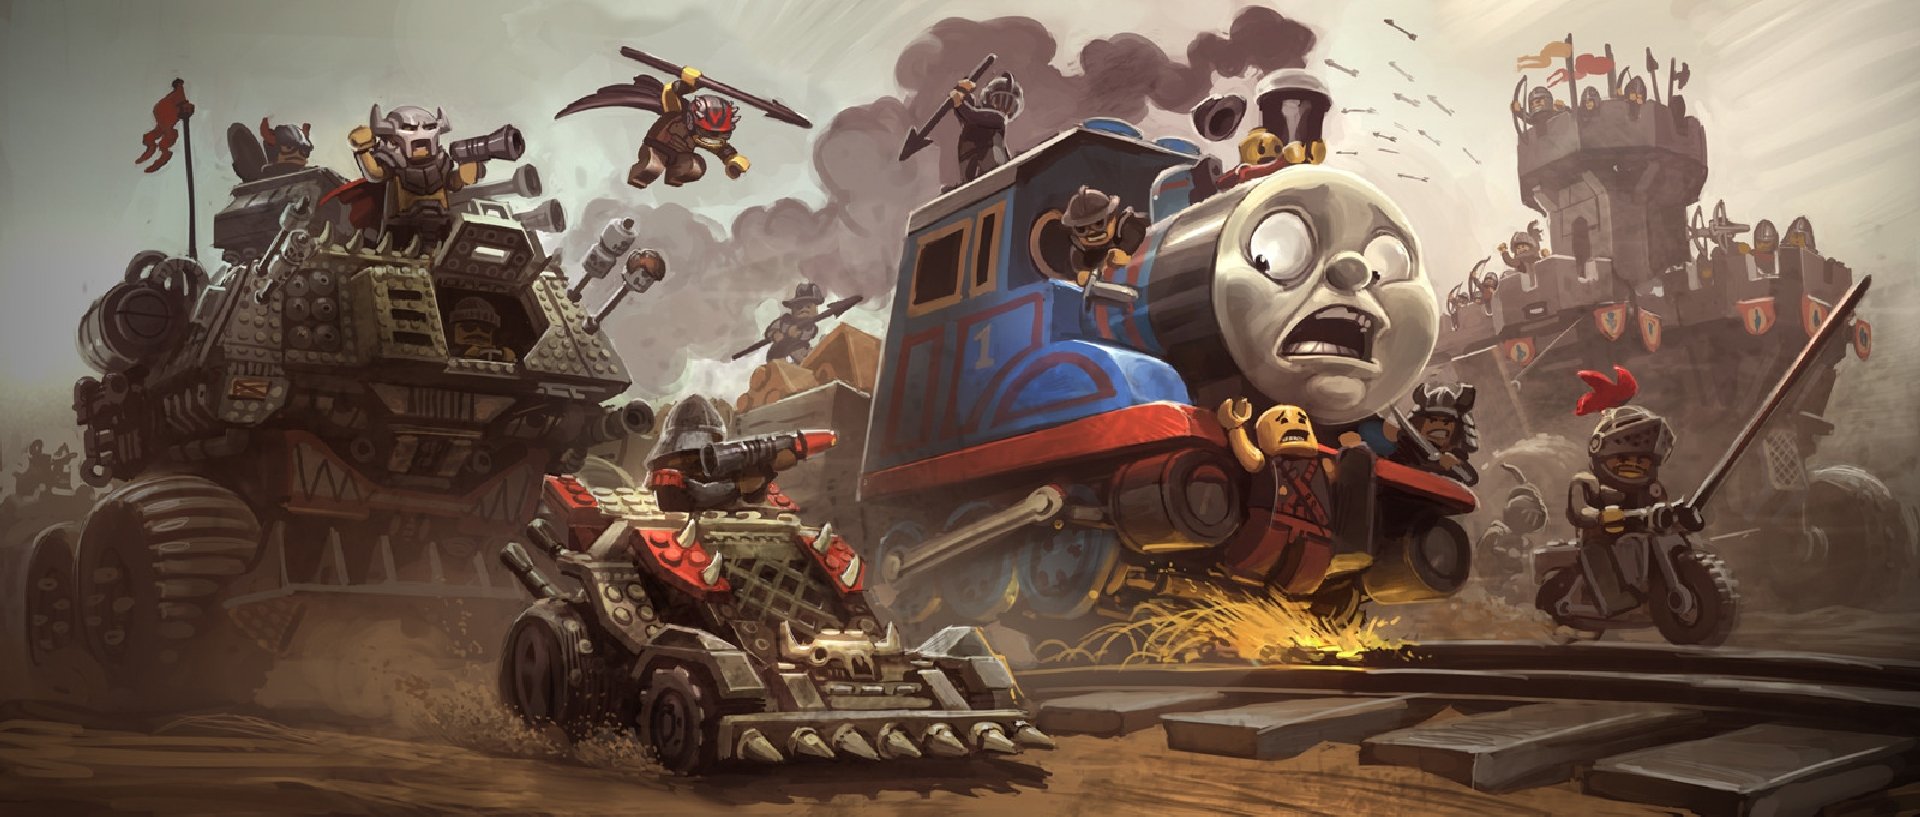 Thomas and friends mural HD wallpapers  Pxfuel